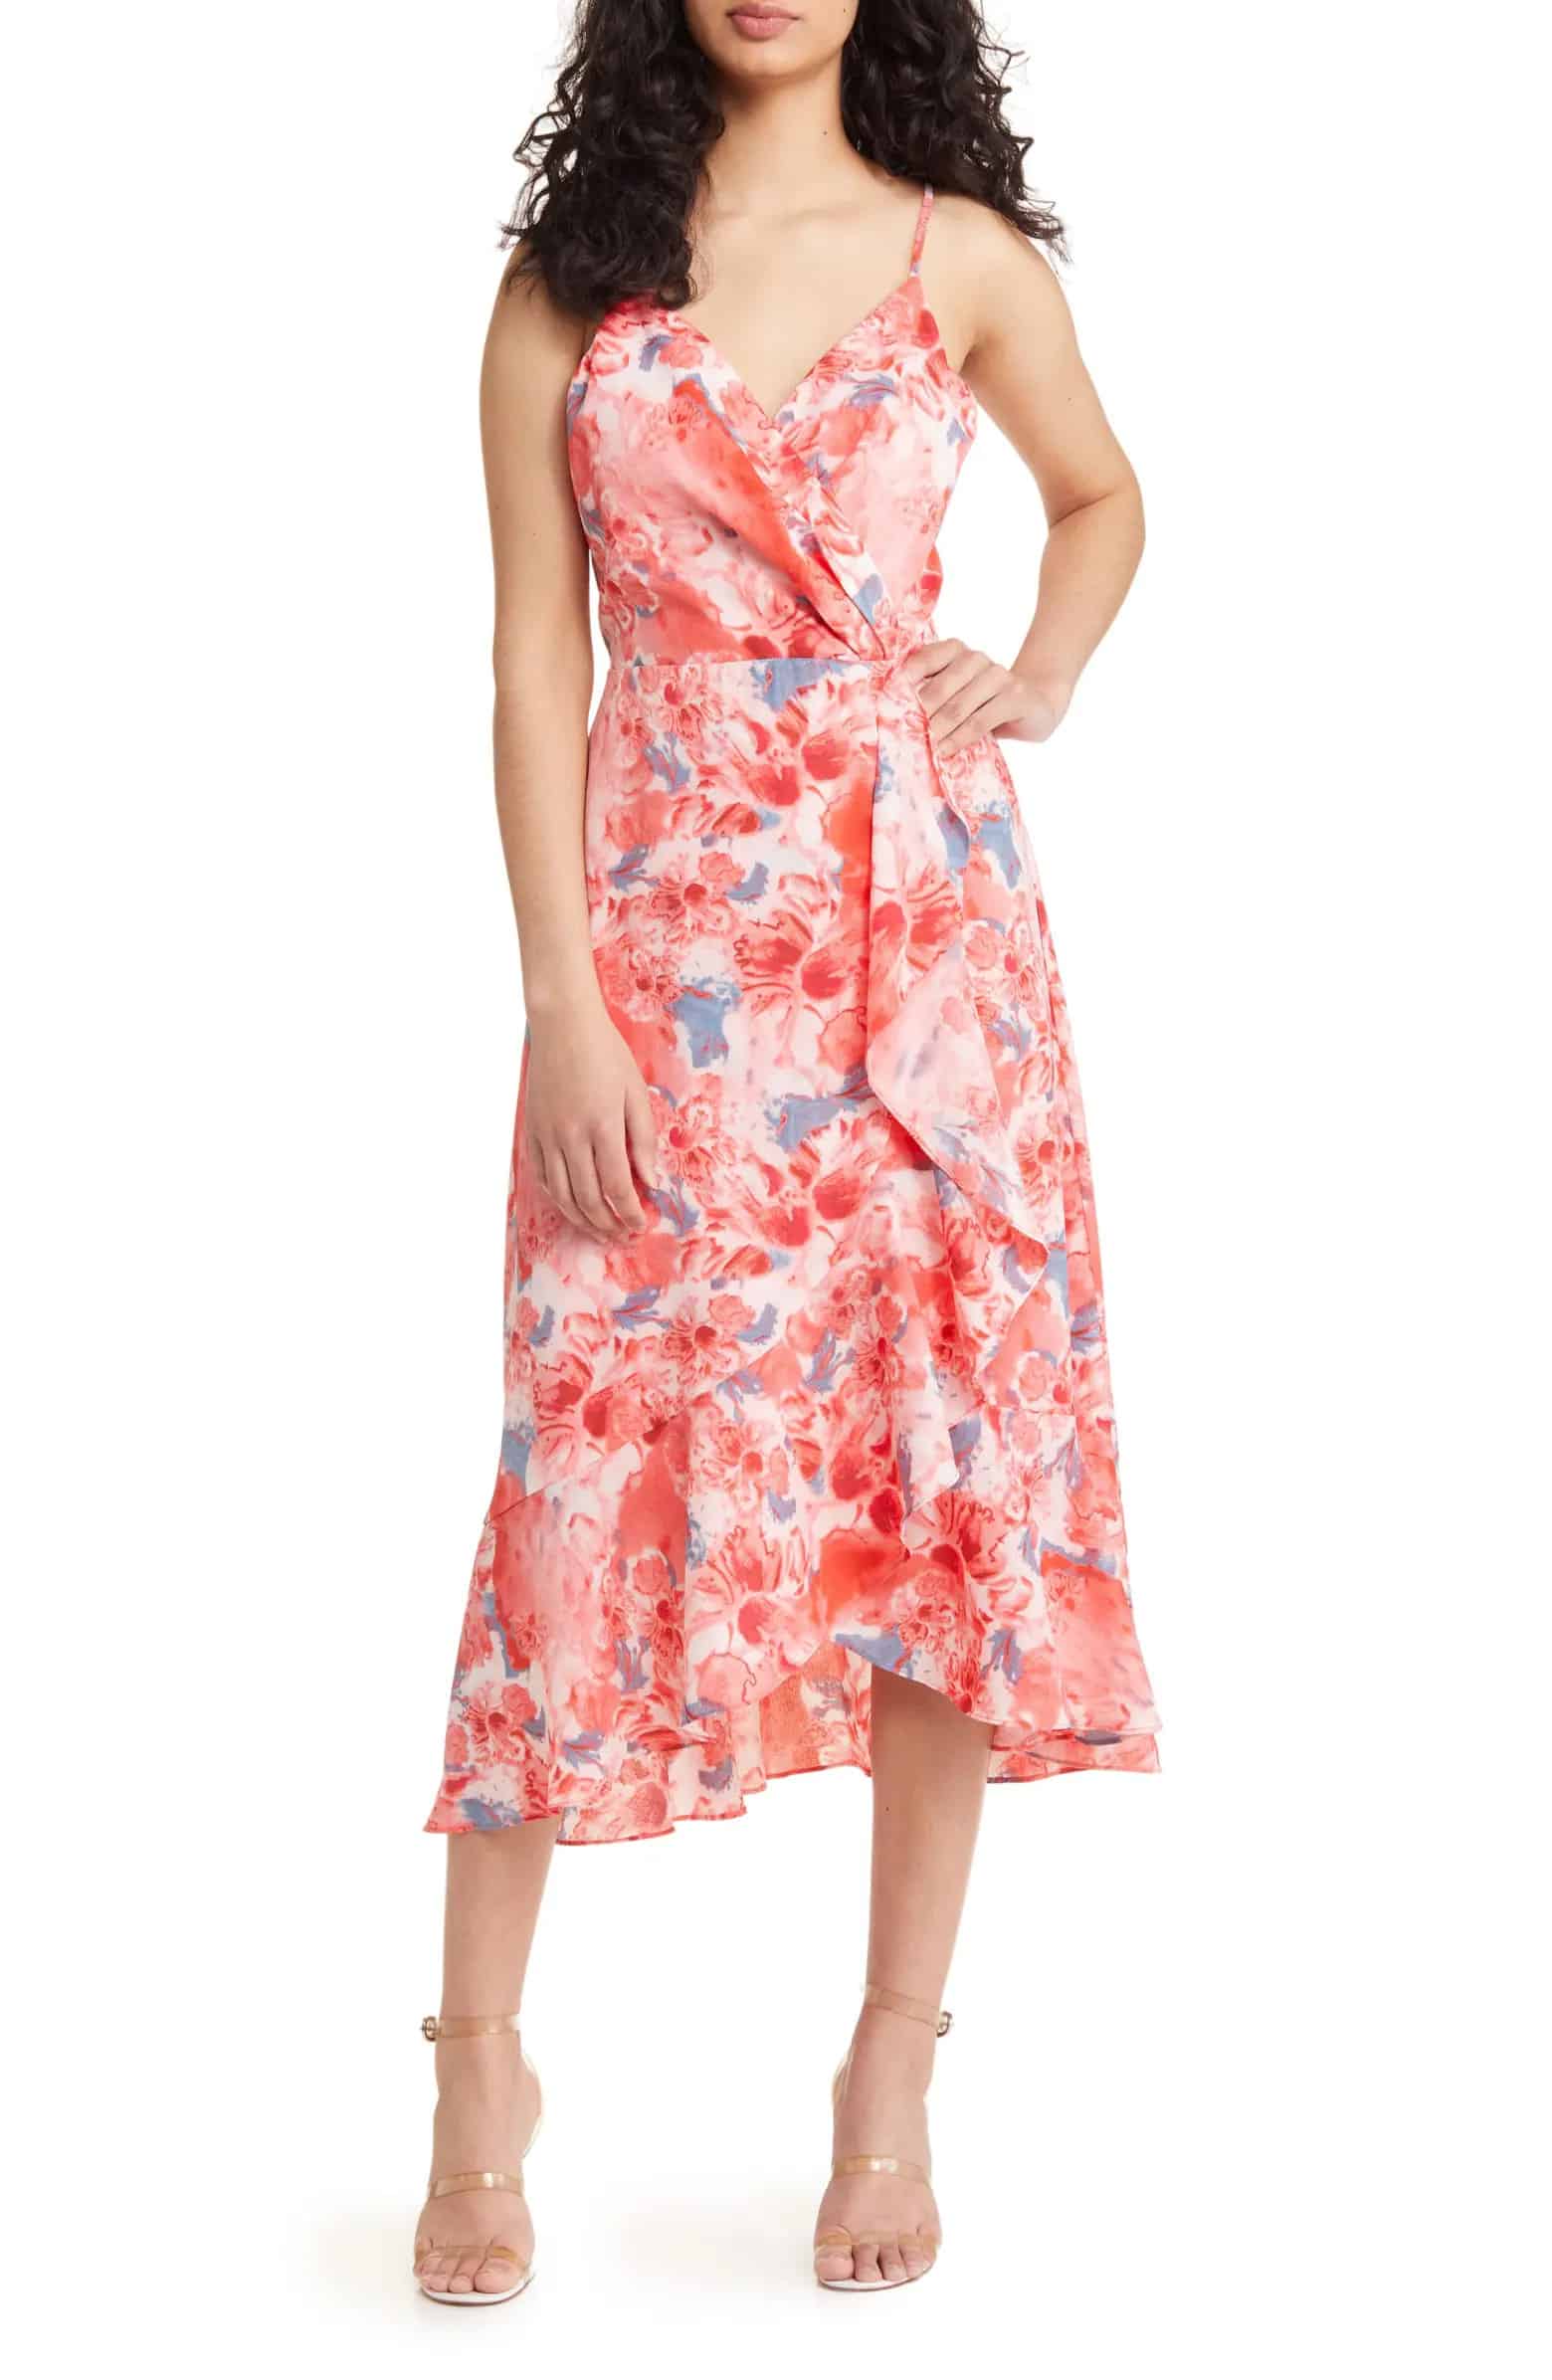 coral printed sundress on a model